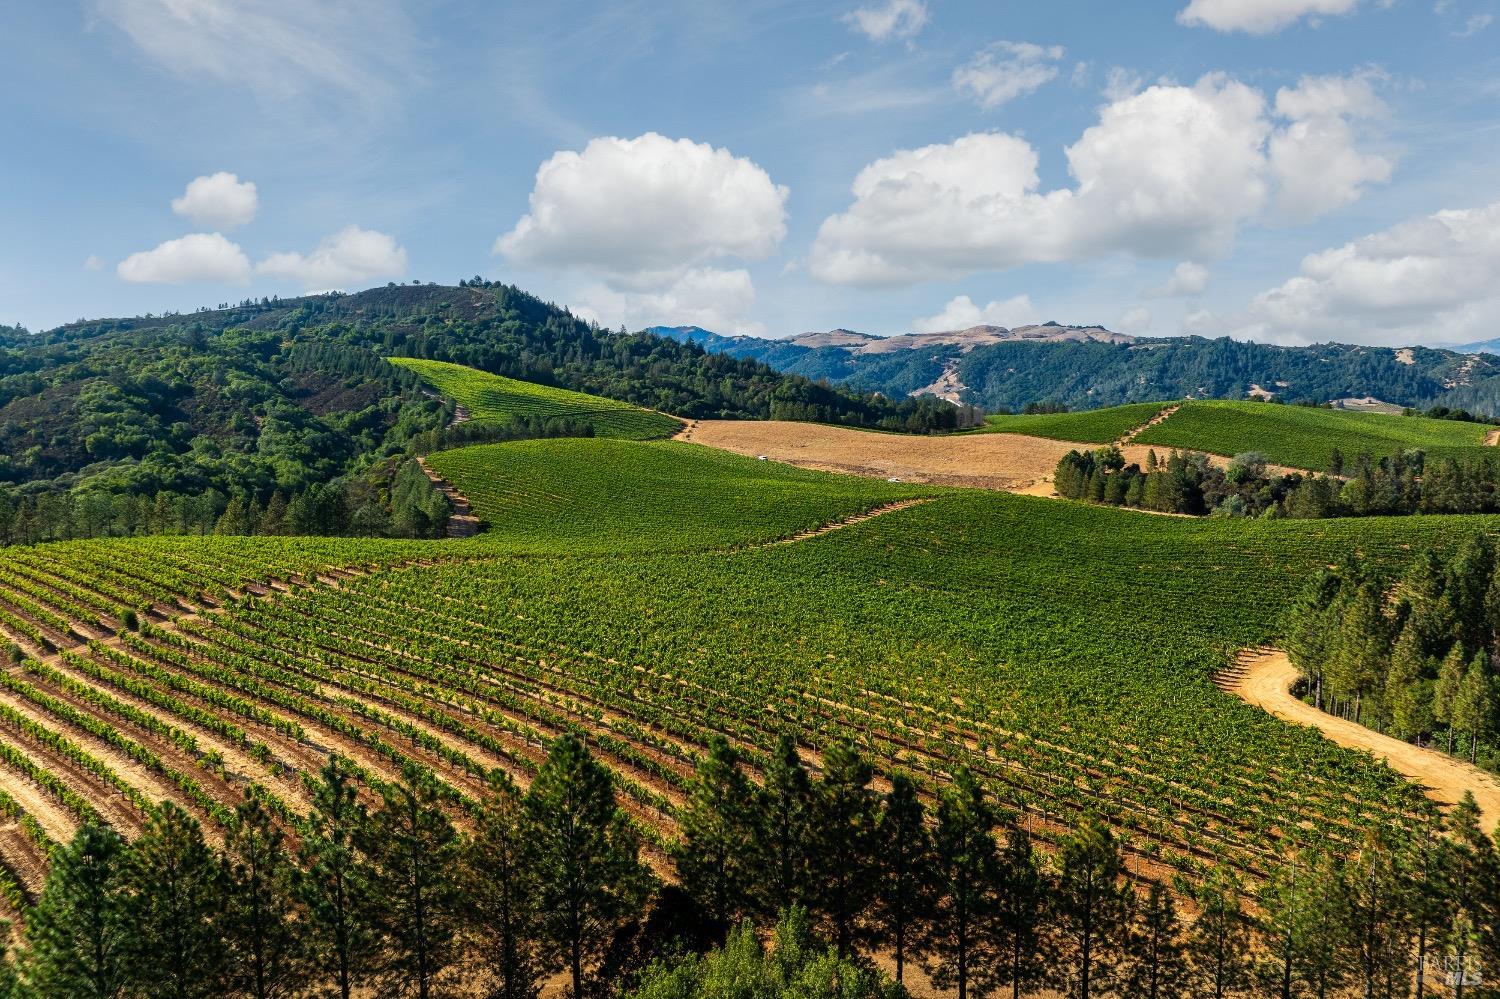 Starting at the foothills of the northwestern end of Dry Creek Valley and rising up to almost 1000 feet, sits the celebrated 250 acre Merlo Vineyard. Commanding unprecedented views over the entire Dry Creek Valley out to Mt. Saint Helena to the west and Lake Sonoma and Pritchett Peaks to the east and Lago di Merlo in the near distance to the south. With 55 acres of premium vines in Dry Creek Appellation professionally planted and maintained and another 7 acres prepped for planting, Merlo Vineyard represents a substantial purchase in one of California top appellation made even more special by the fact it is among the highest altitude vineyards within the appellation. The entire vineyard is irrigated by Petite Lago di Merlo which is 18 acre foot reservoir that sits on the border of the property wherein Merlo Vineyard has the exclusive diversion rights. The grapes are sold to Duckhorn, Benzinger and Christopher Creek. Merlo Vineyard is much more than just a vineyard. In addition to the vine land there is almost another 200 acres of unspoiled land and 4 Legal Parcels/Certificates of Compliance the potential for development are endless. There are multiple stunning building sites with giant vistas and water resources to support the same. There is also a substantial redwood/fir stand.